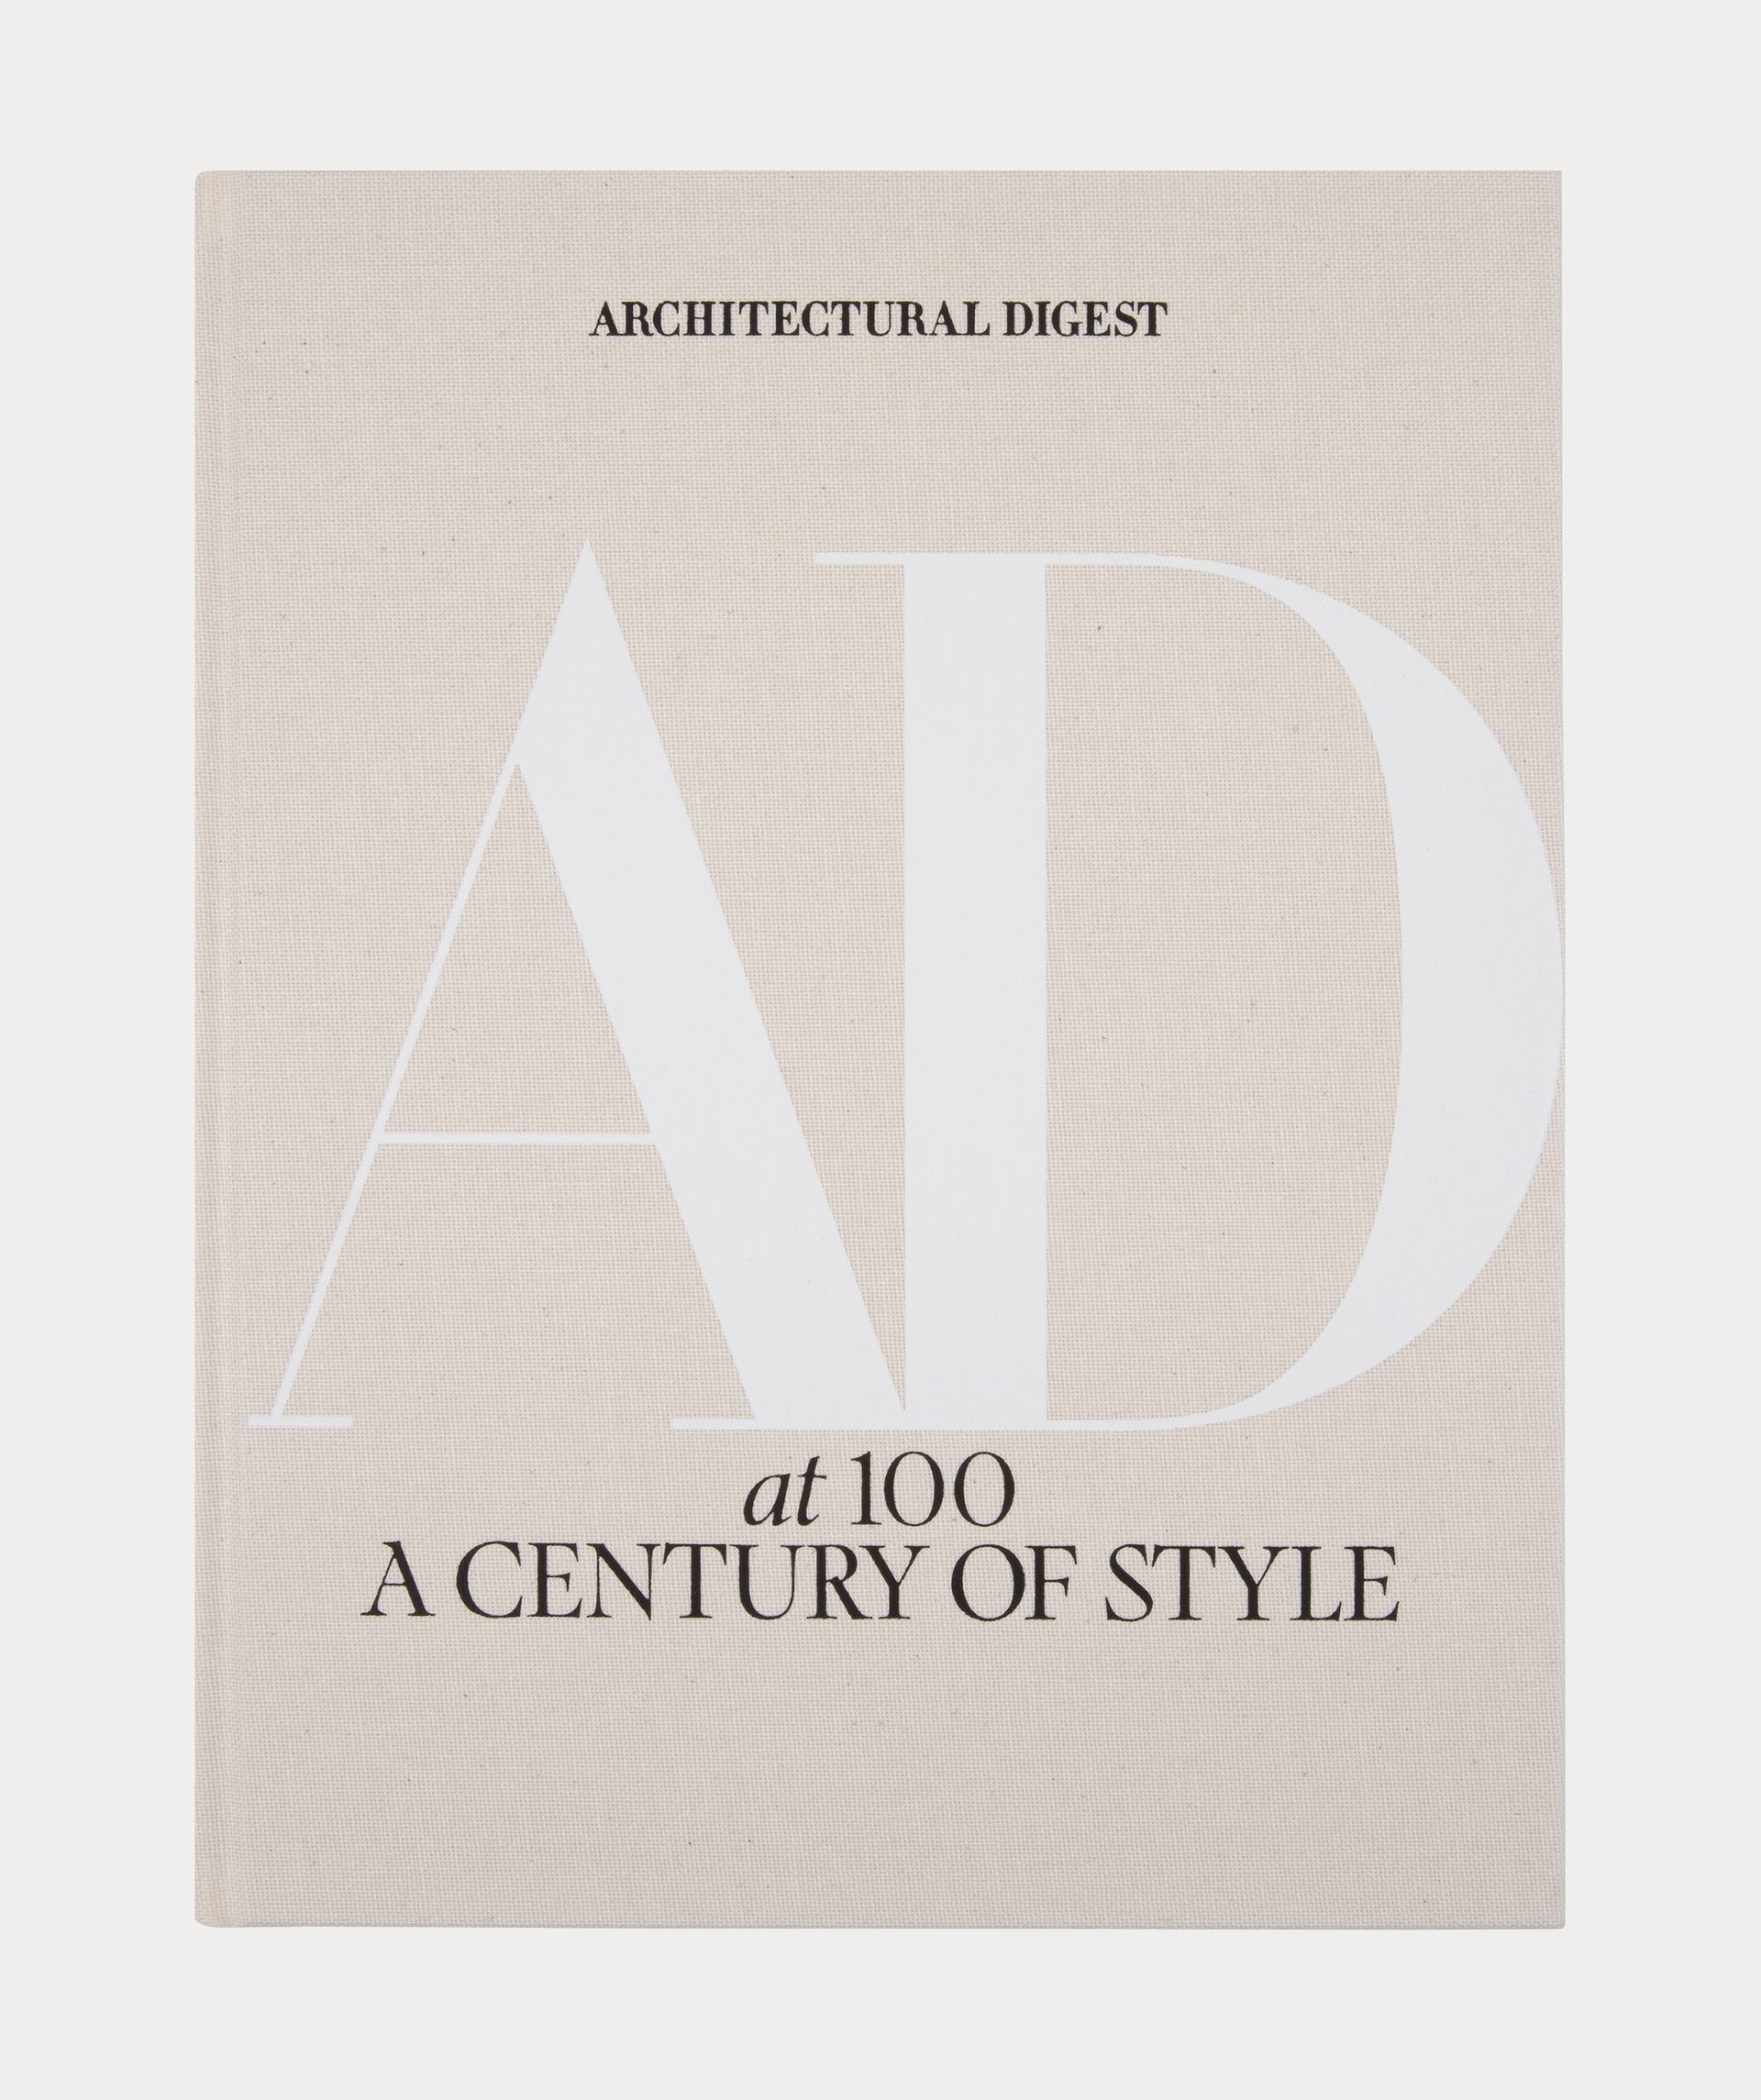 AD at 100: A Century of Style coffee table book